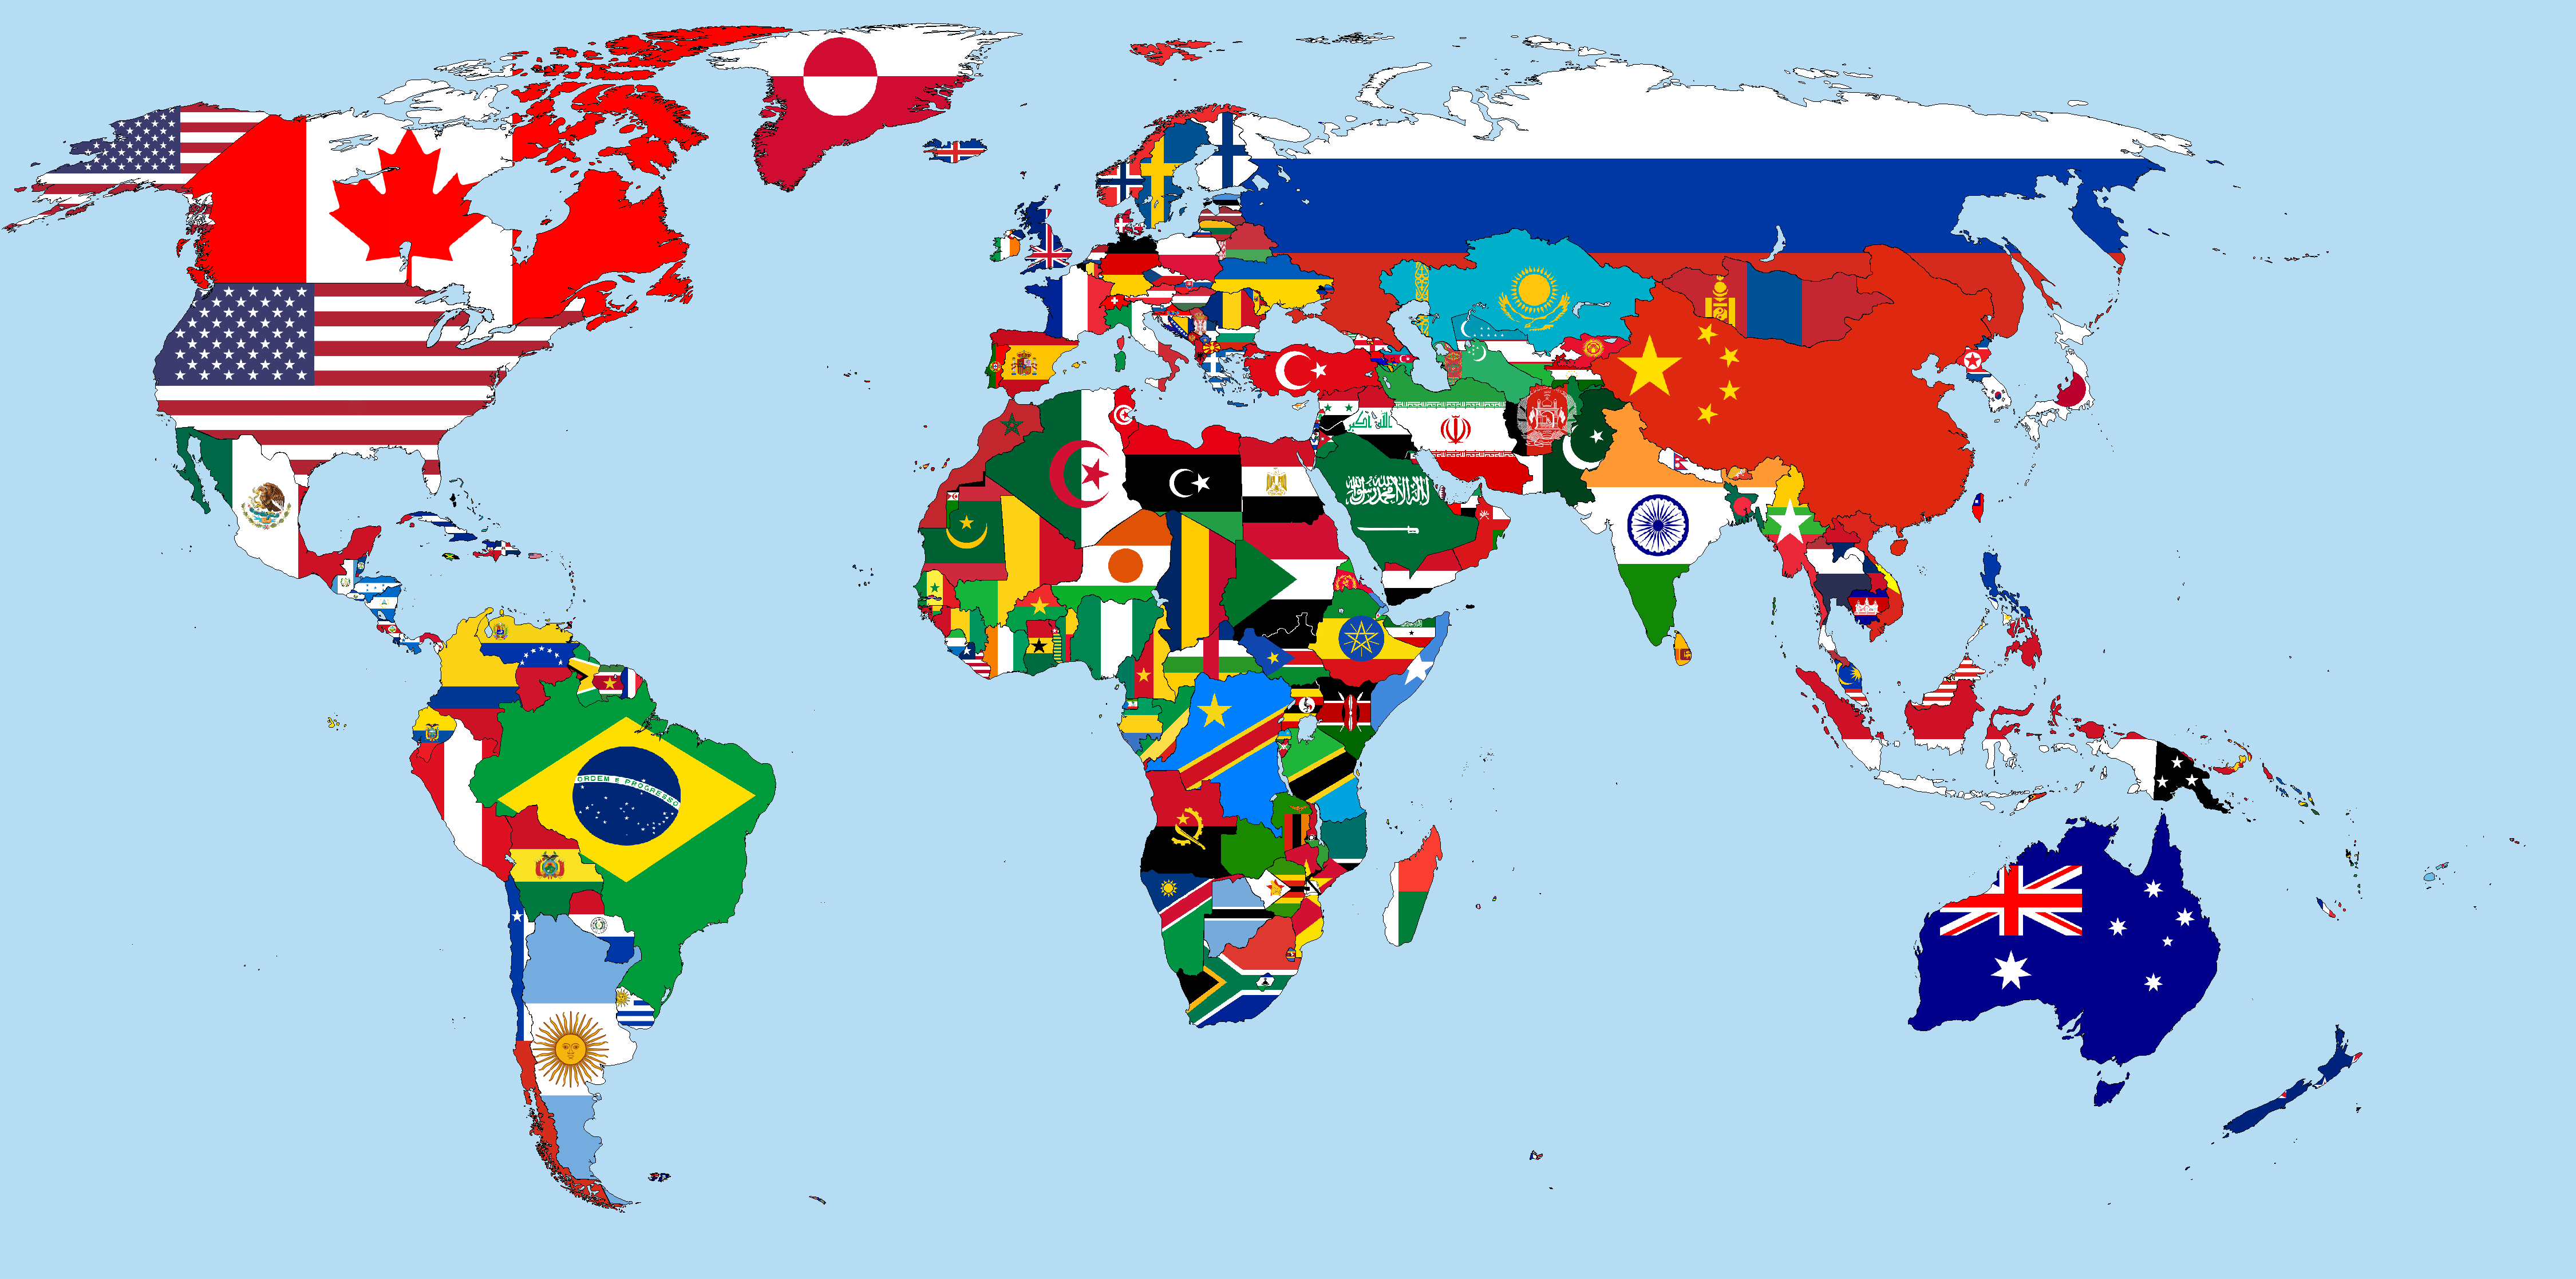 2017 Flag Map of the World